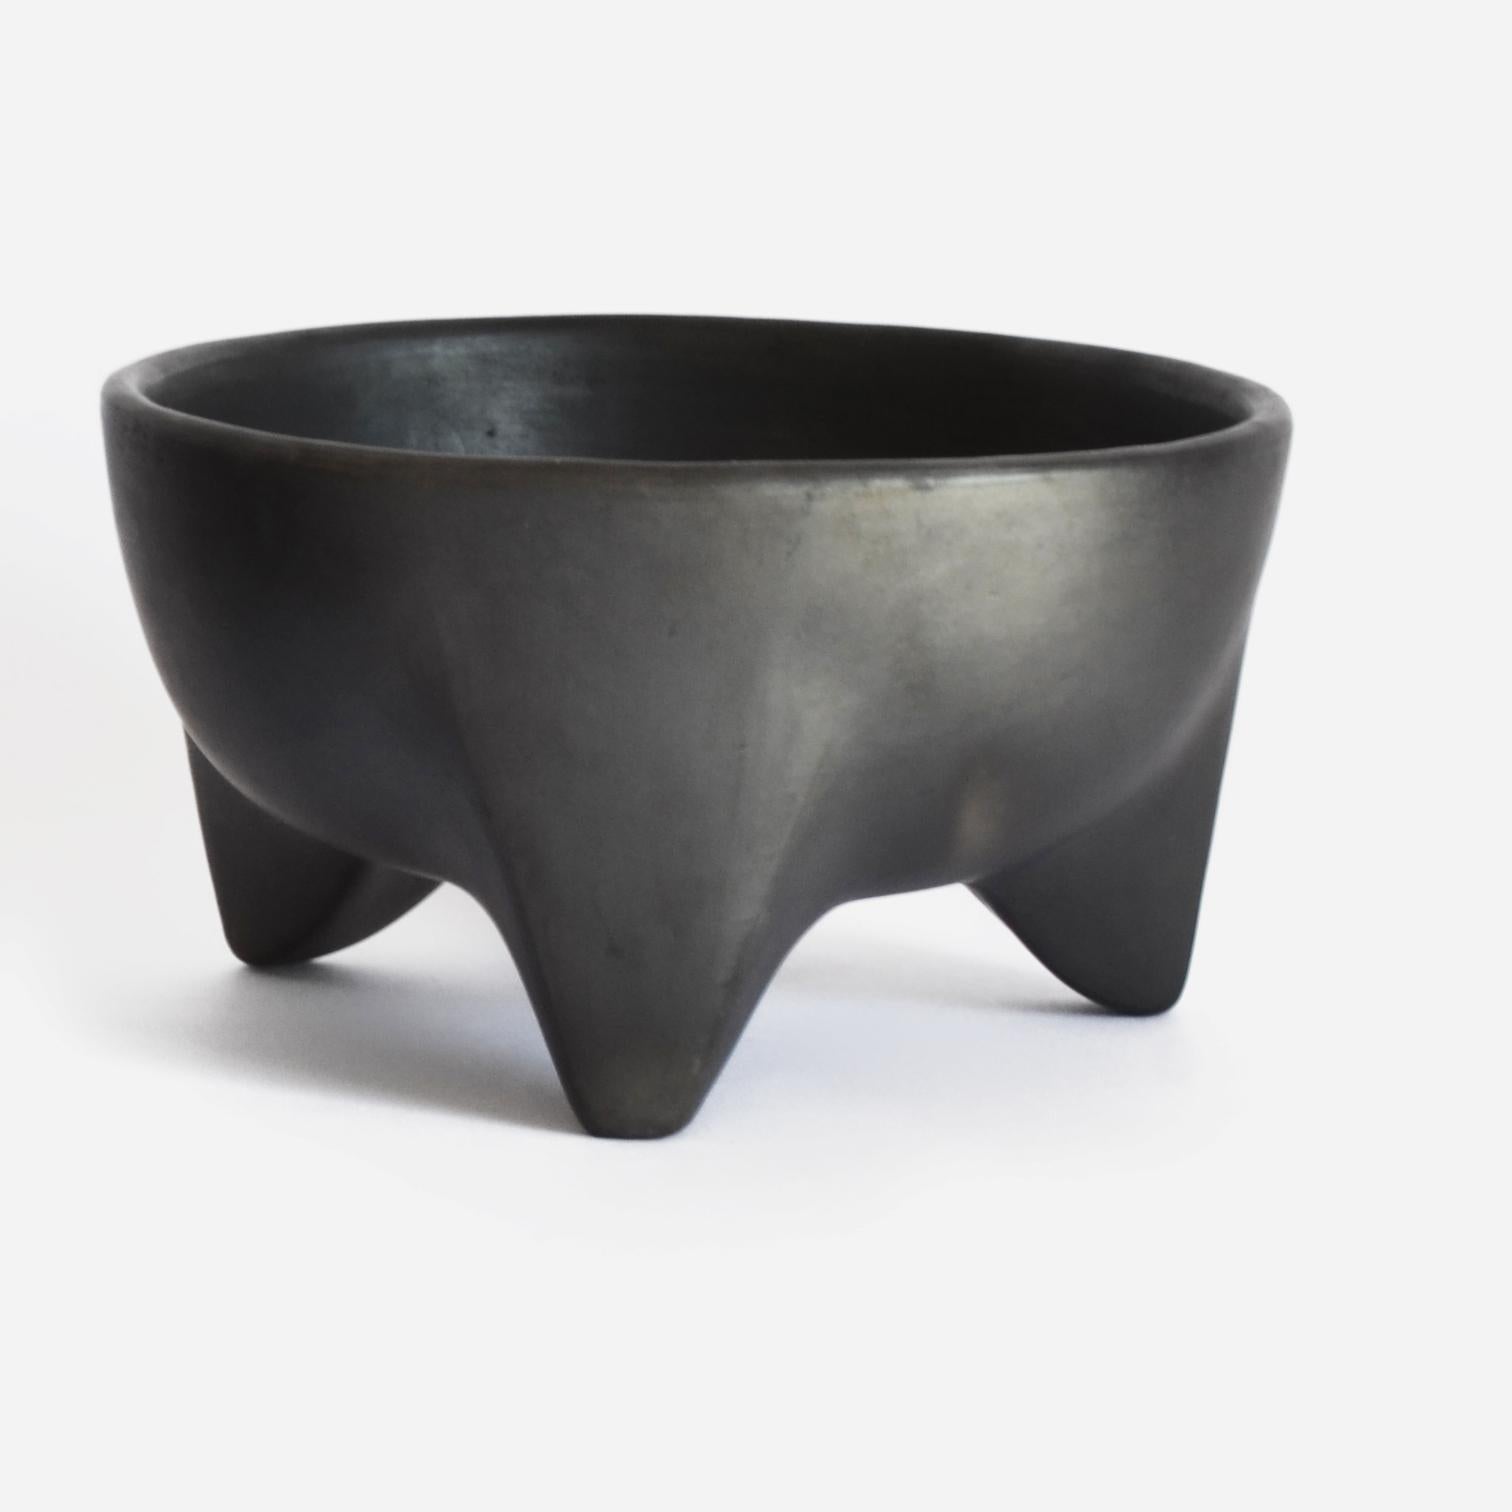 Contemporary Oaxaca Black Clay Tzinacan Decorative Burnished Polished Fired Oxygen Reduction For Sale